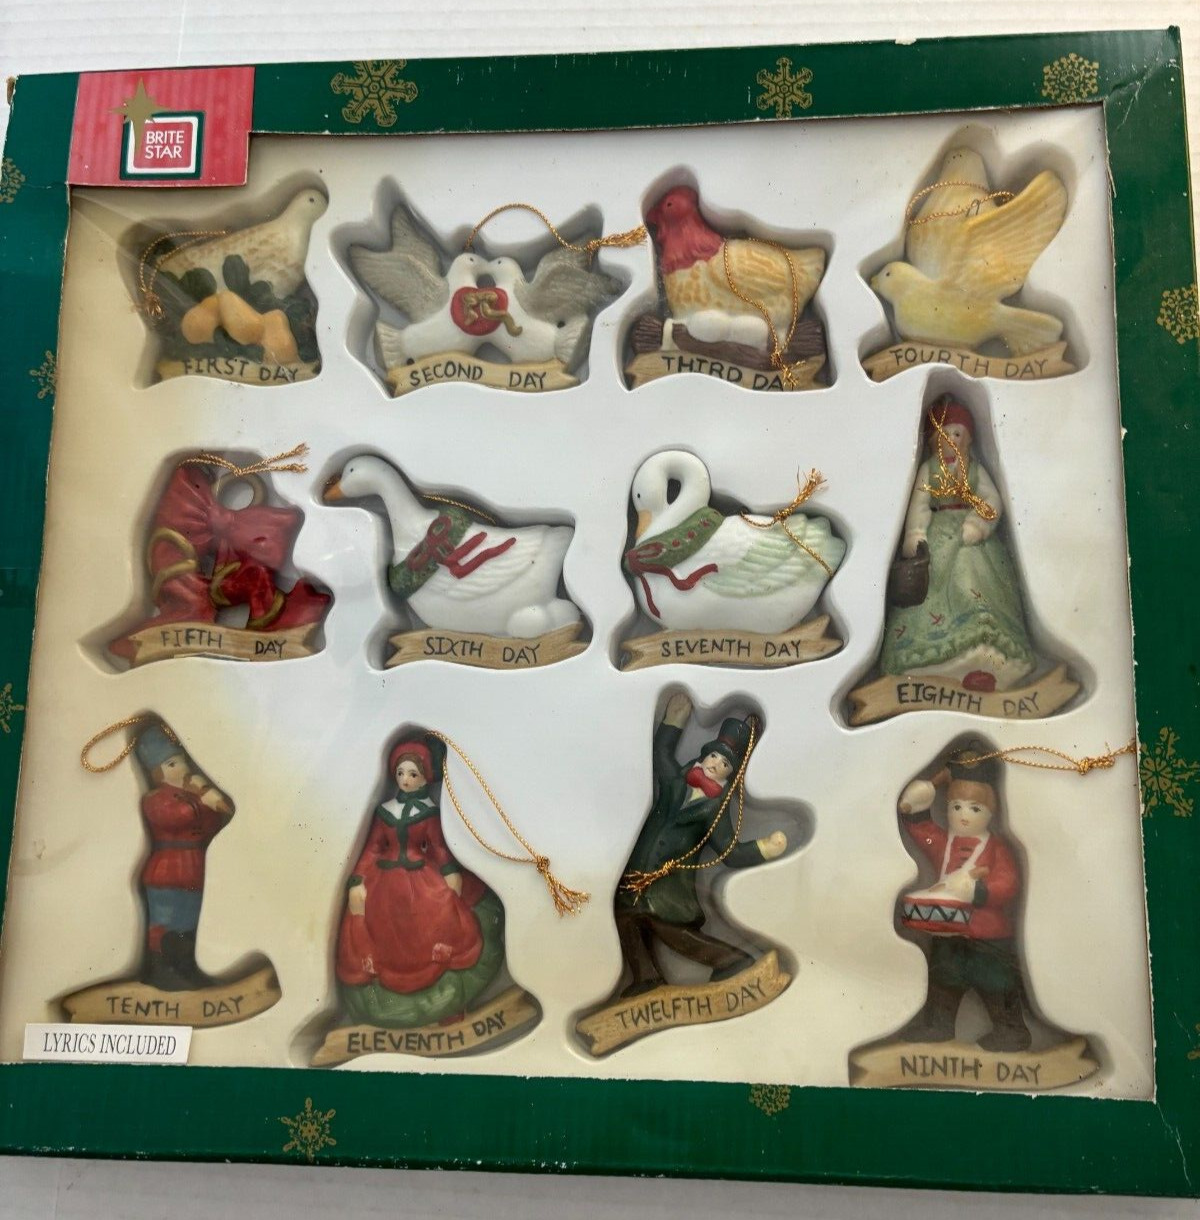 12 Days of Christmas Ceramic Ornaments with Box by Brite Star Vintage